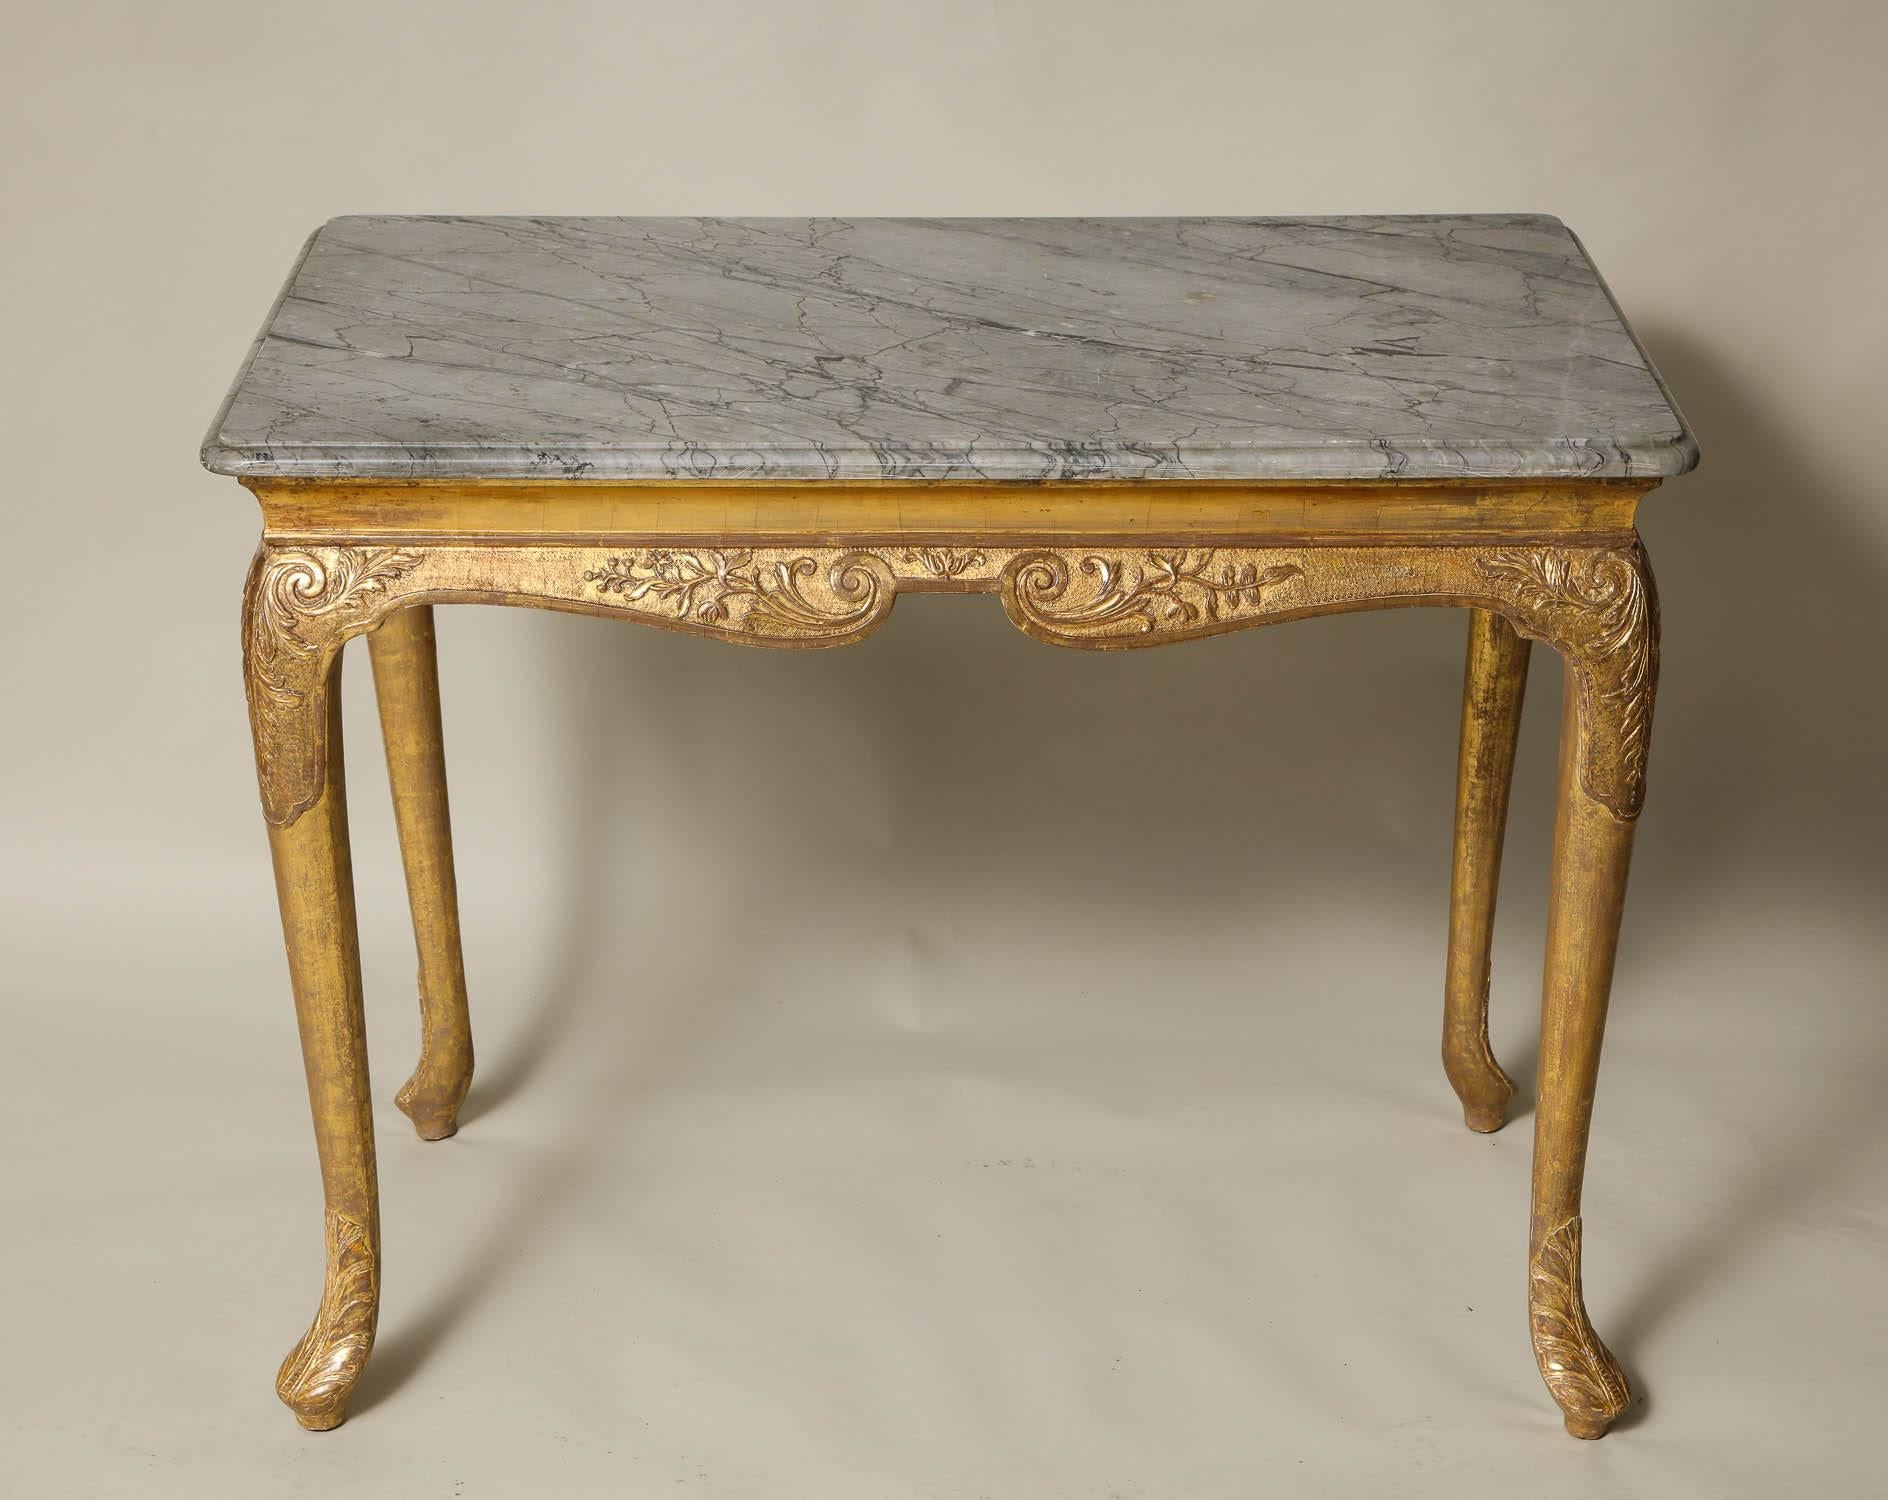 George I gilt side table with grey marble top. the apron, knees and feet with foliate and punch-work carved gesso in burnished water gilding on a matte gold ground, circa 1730. The top later.